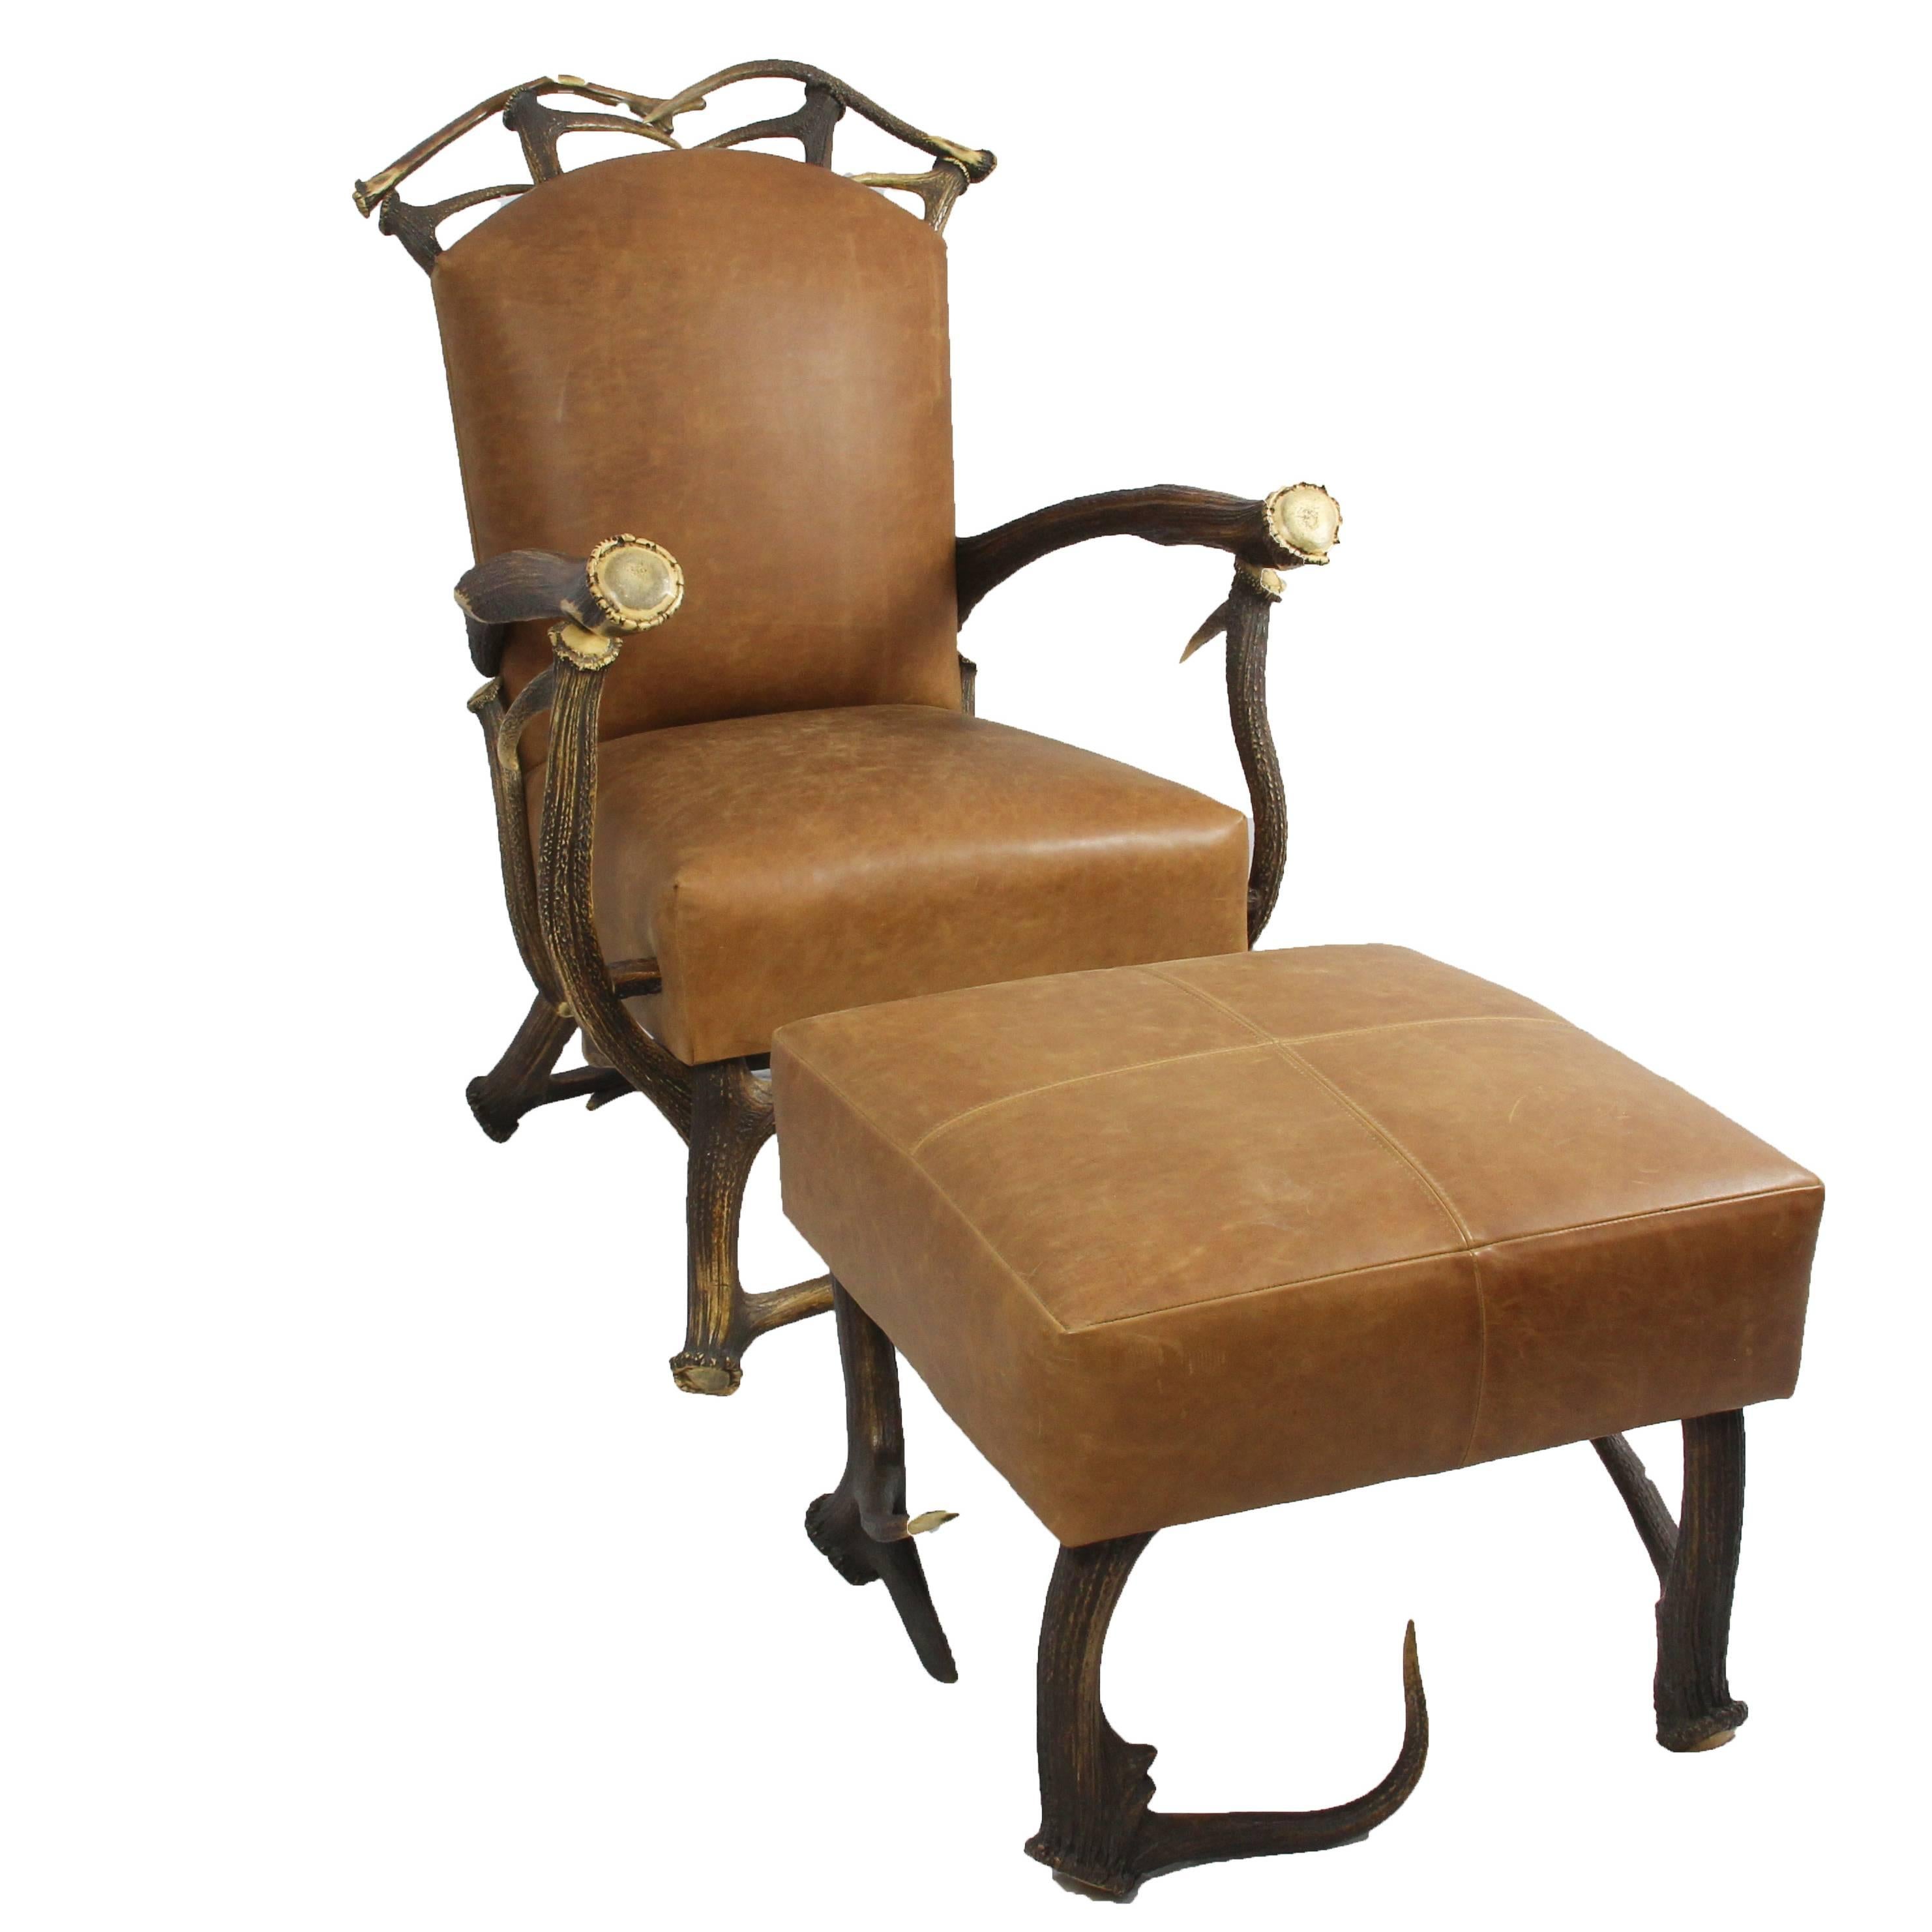 Brown Leather and Red Stag Antler Chair with Matching Ottoman